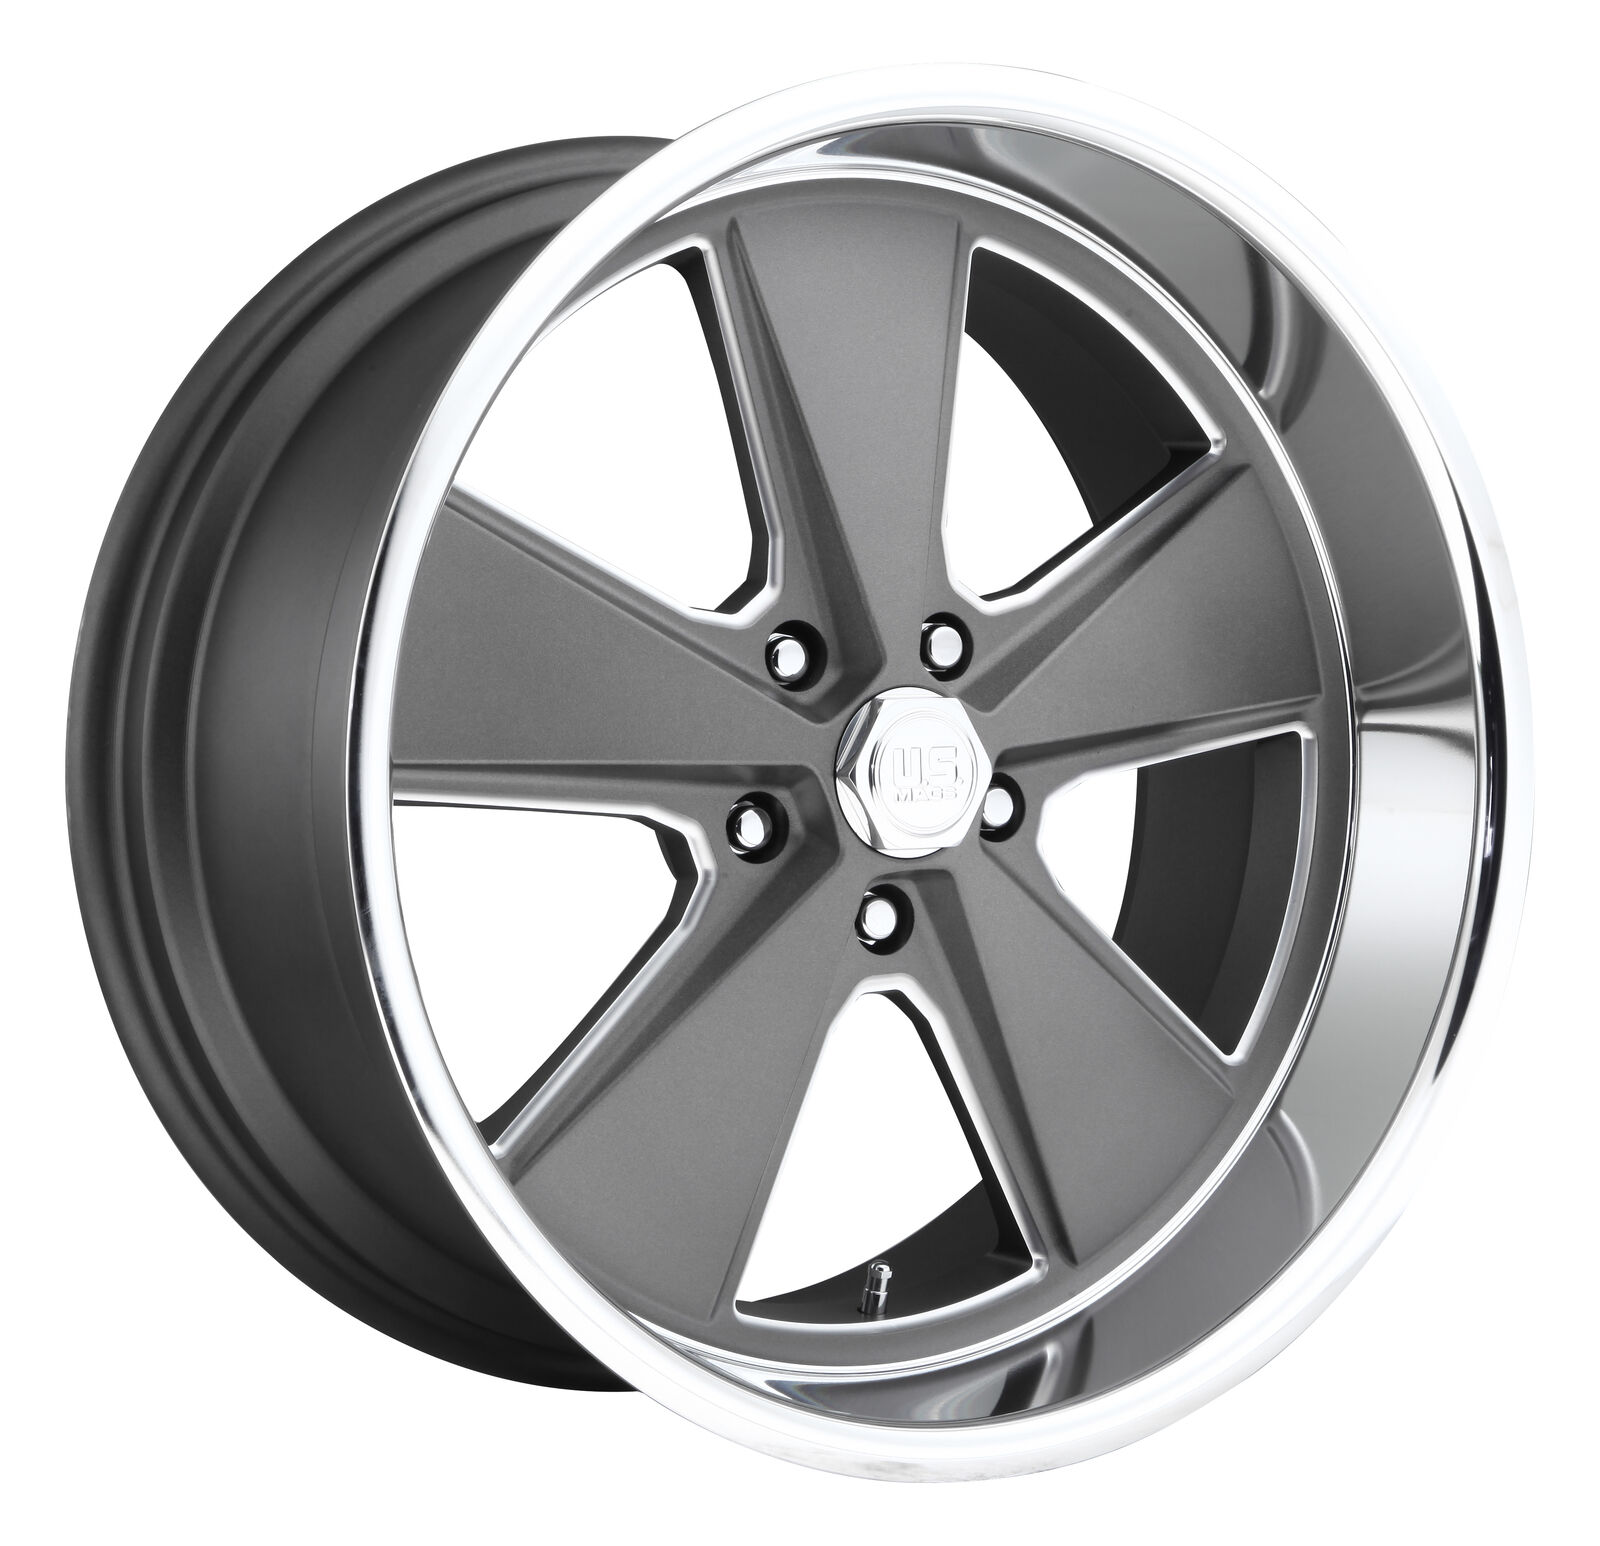 CPP US Mags U120 Roadster wheels 18x8 + 20x9.5 fits: CHEVY IMPALA CHEVELLE SS